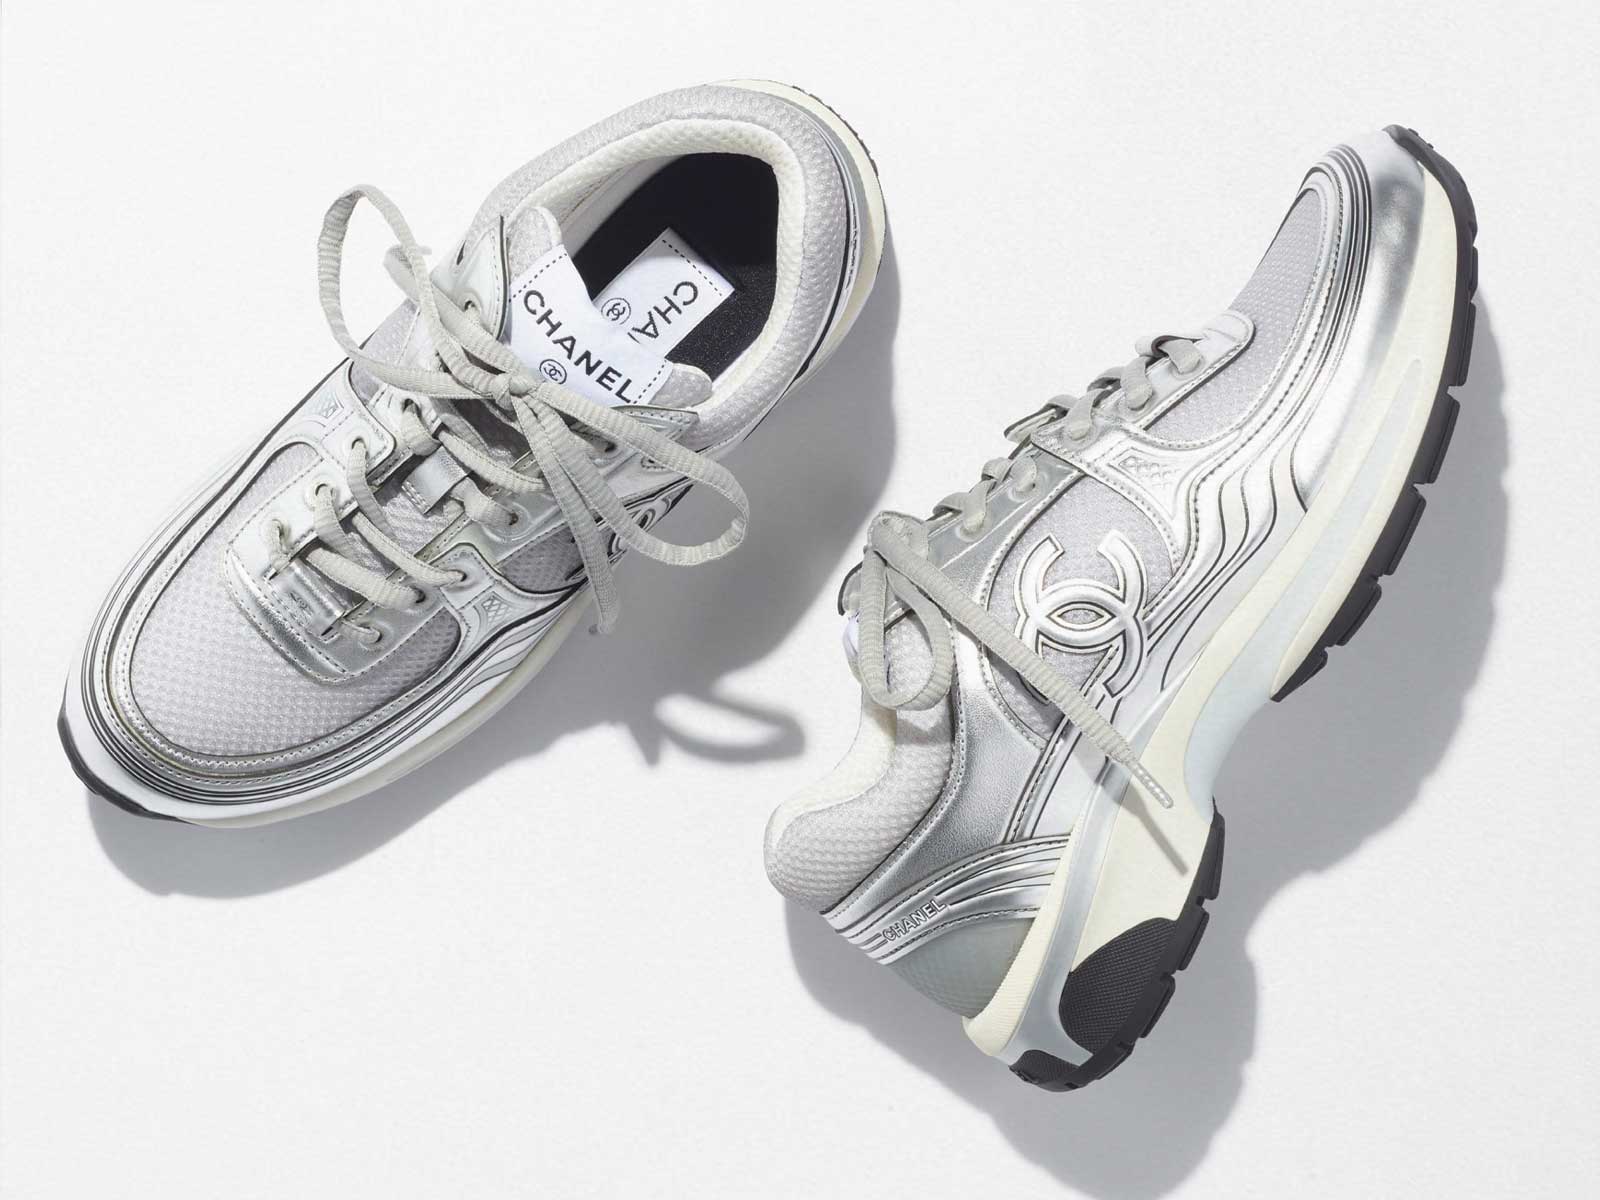 Chanel has already stealthily conquered the sneaker market